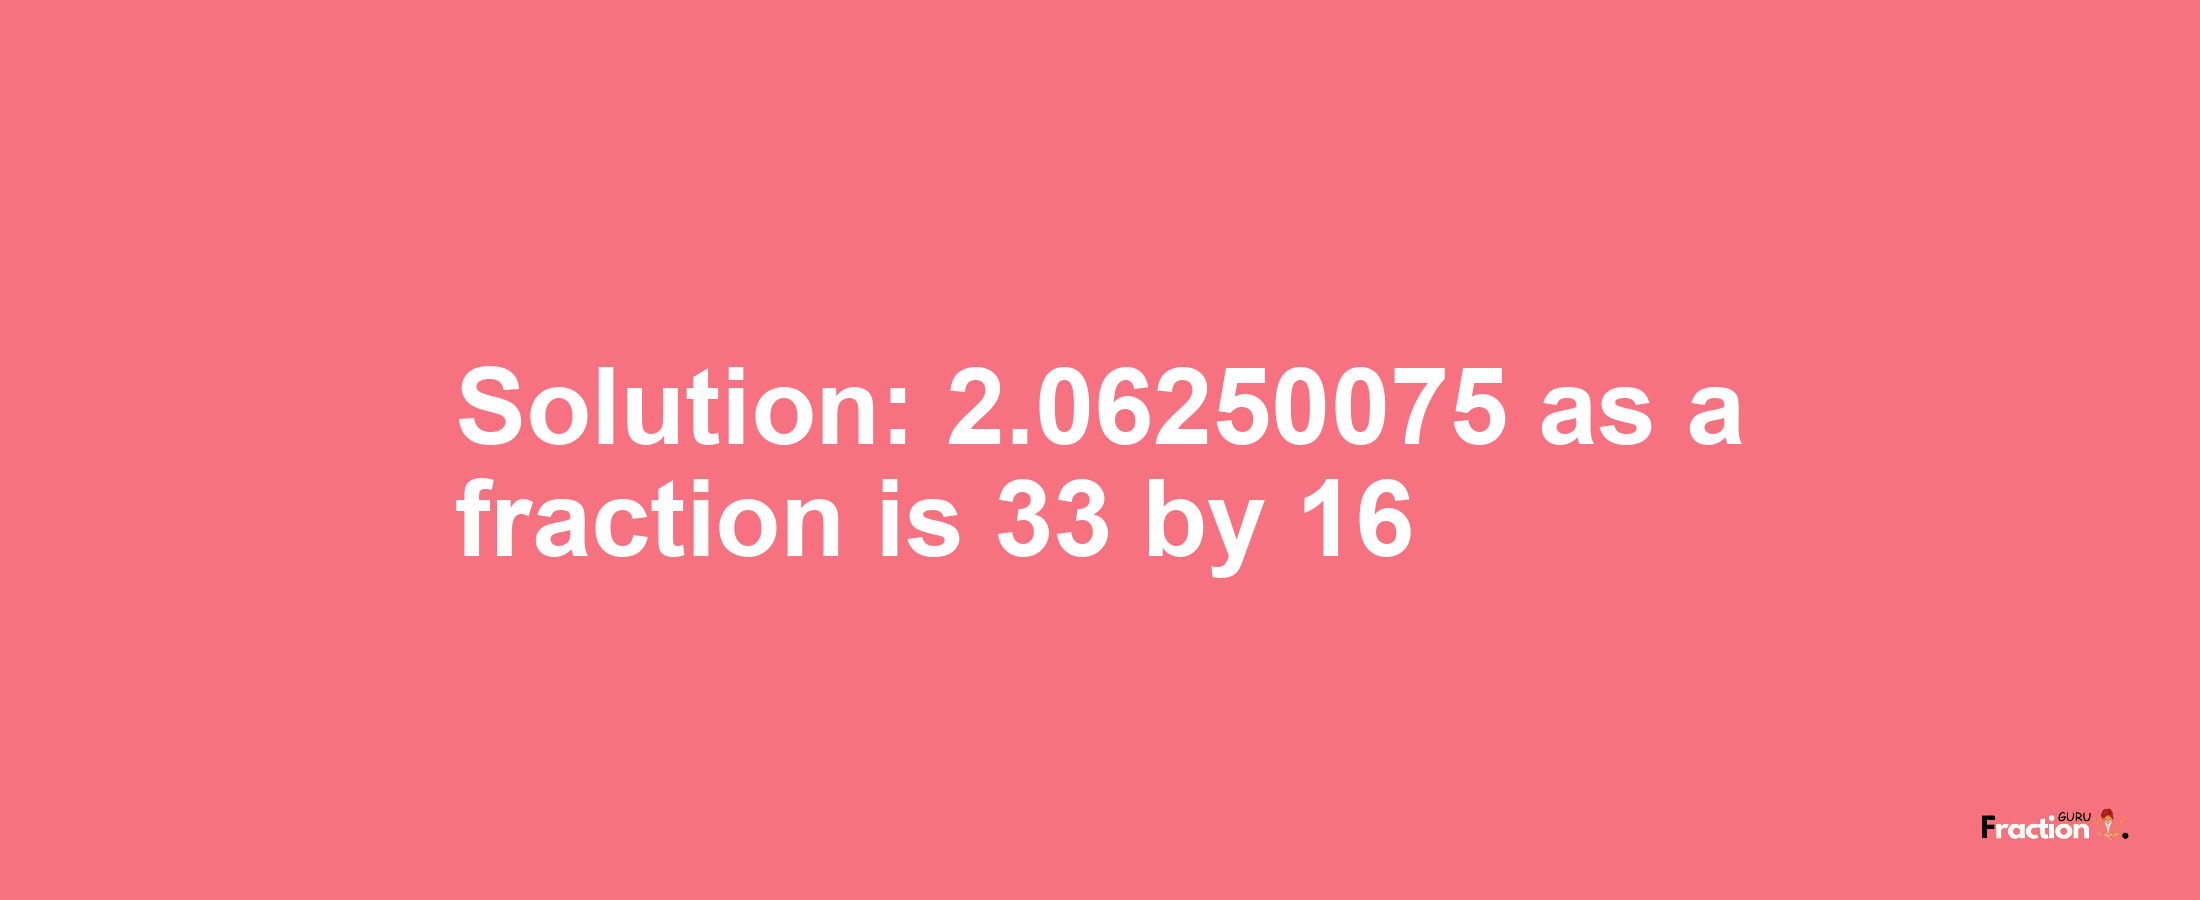 Solution:2.06250075 as a fraction is 33/16